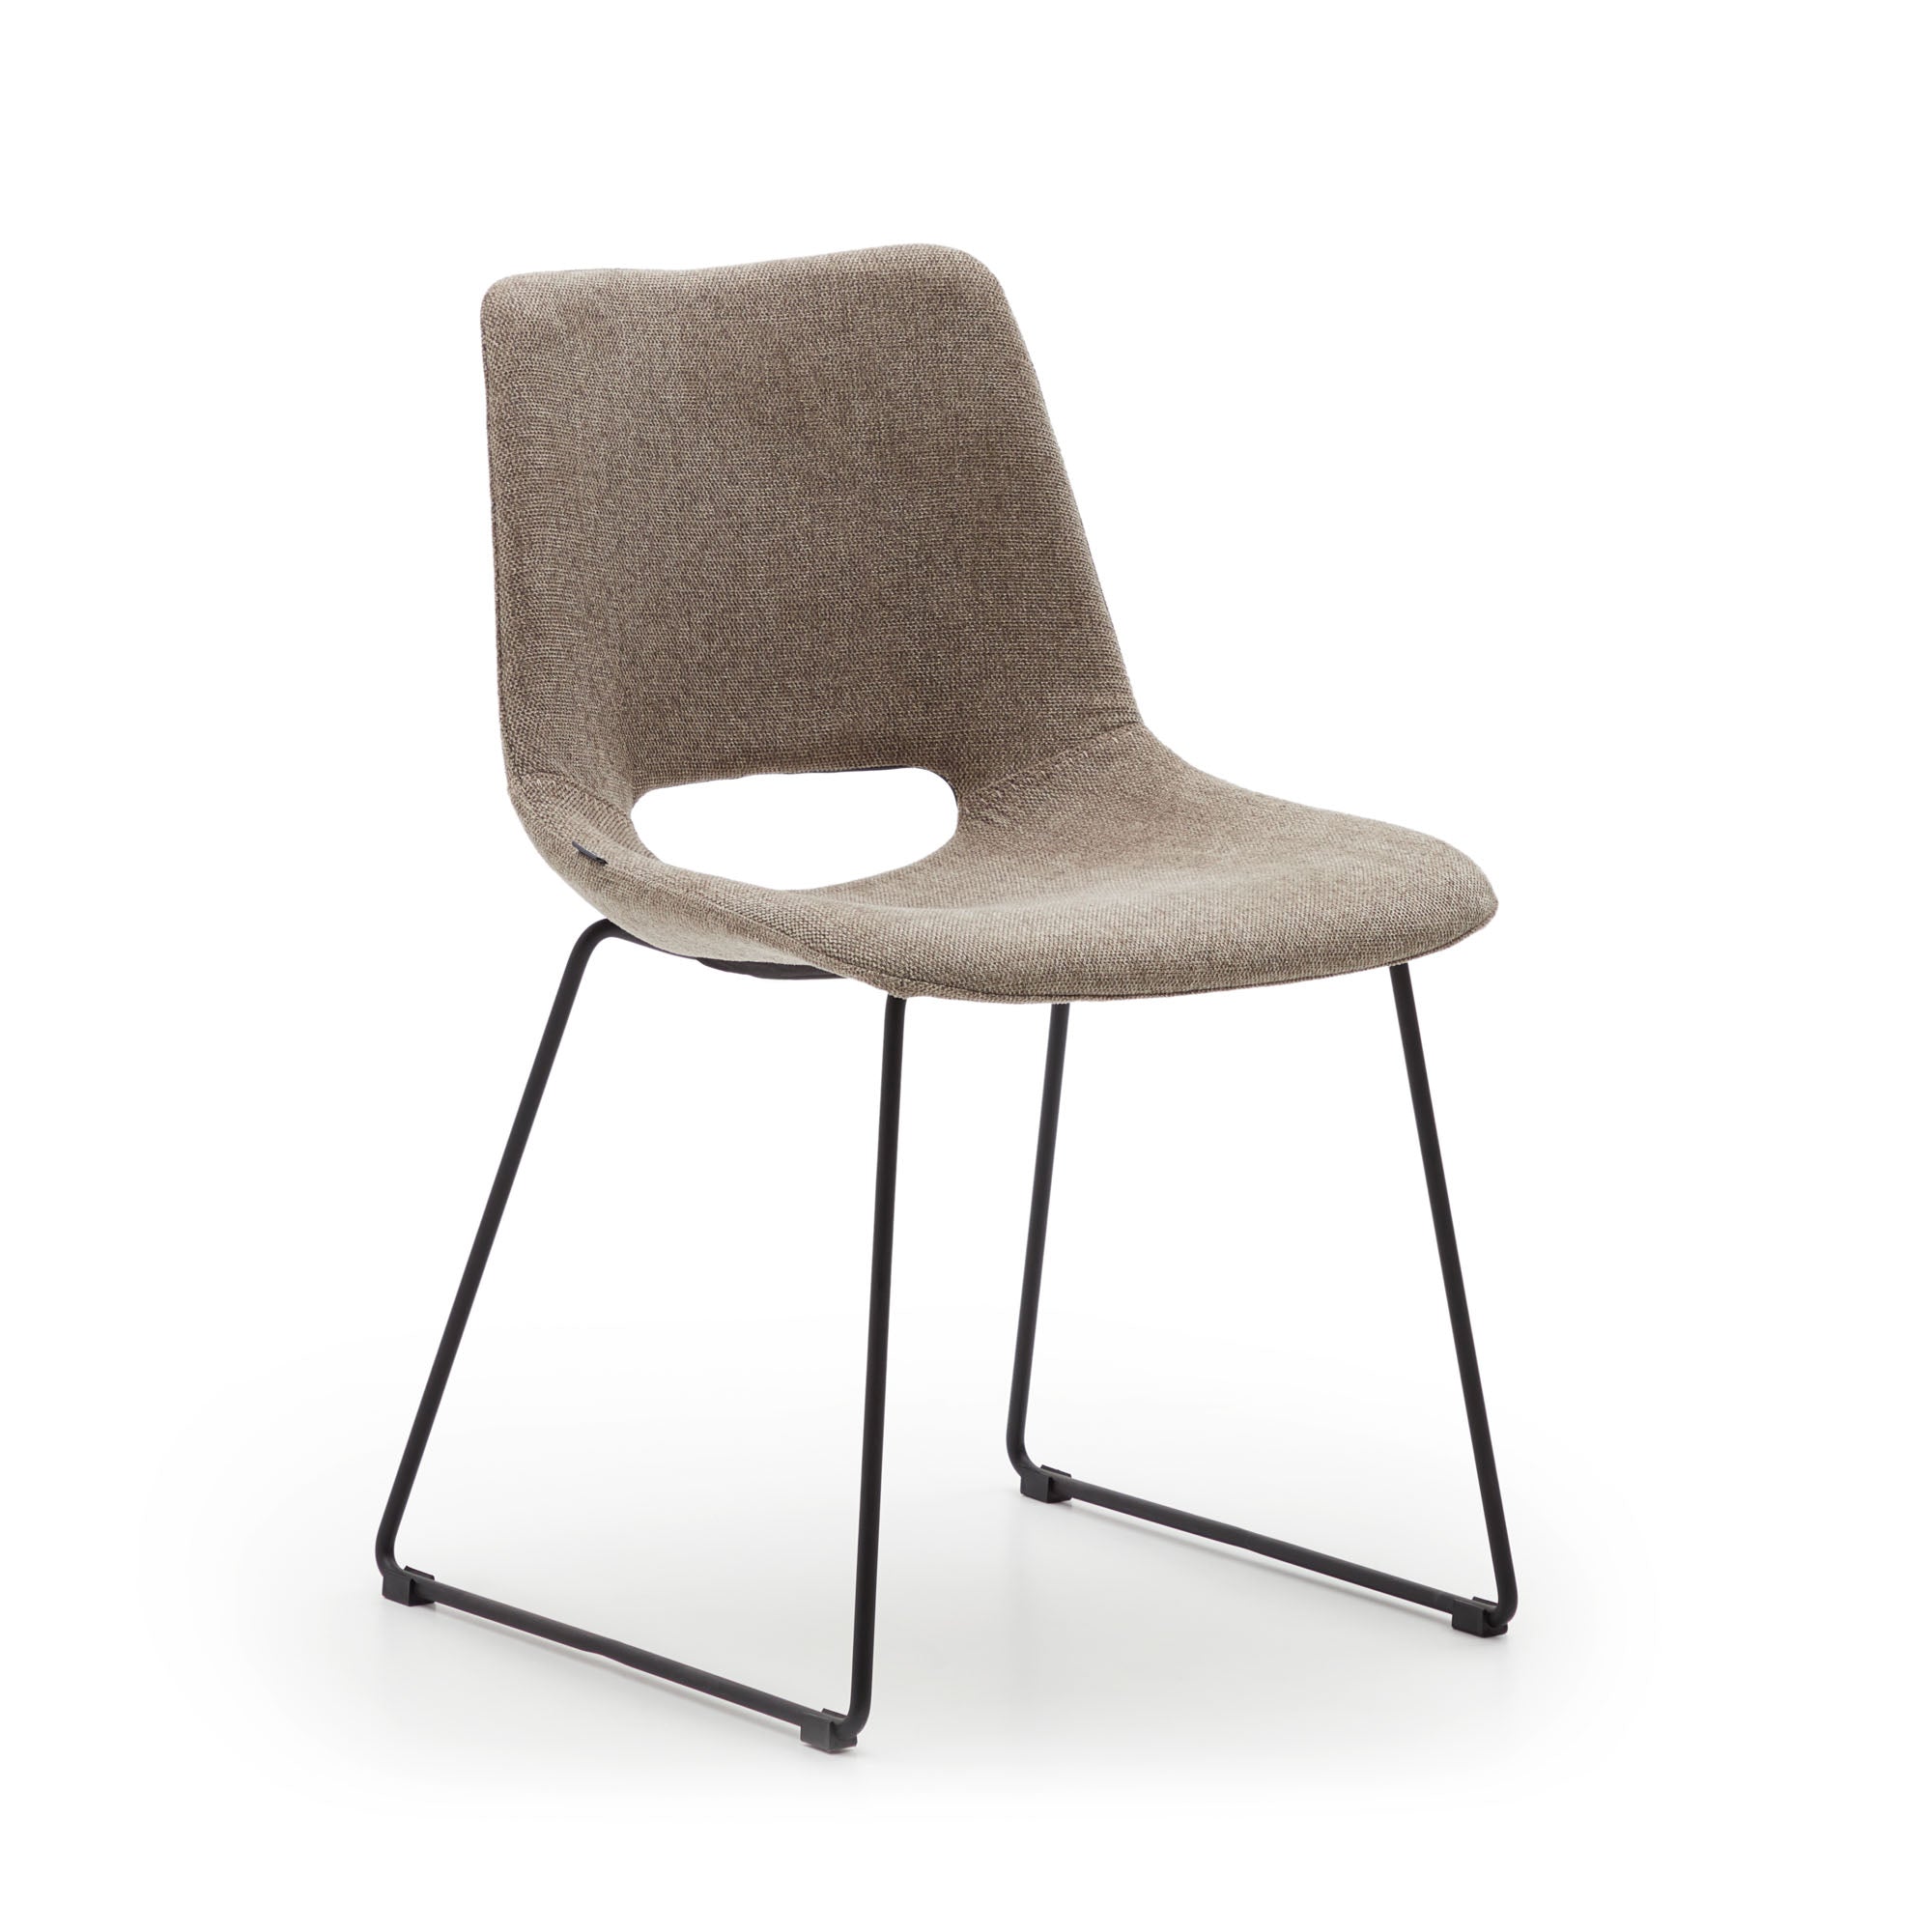 Zahara chair in brown with steel legs in a black finish